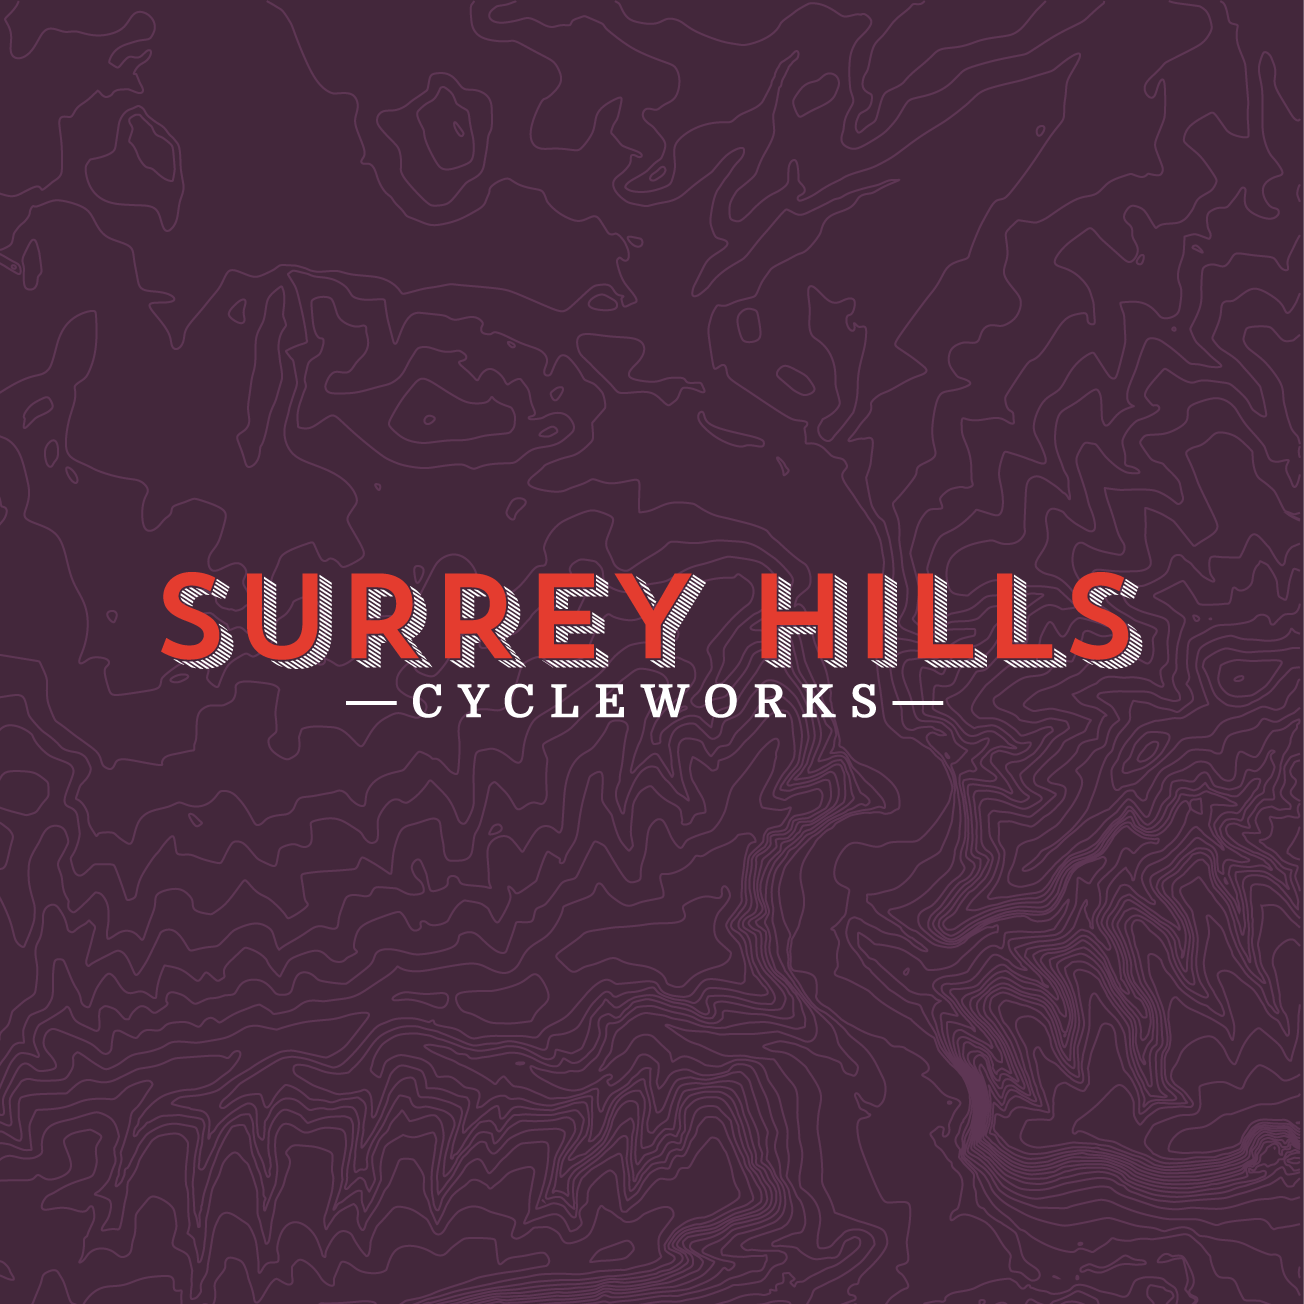 Club Image for SURREY HILLS CYCLEWORKS